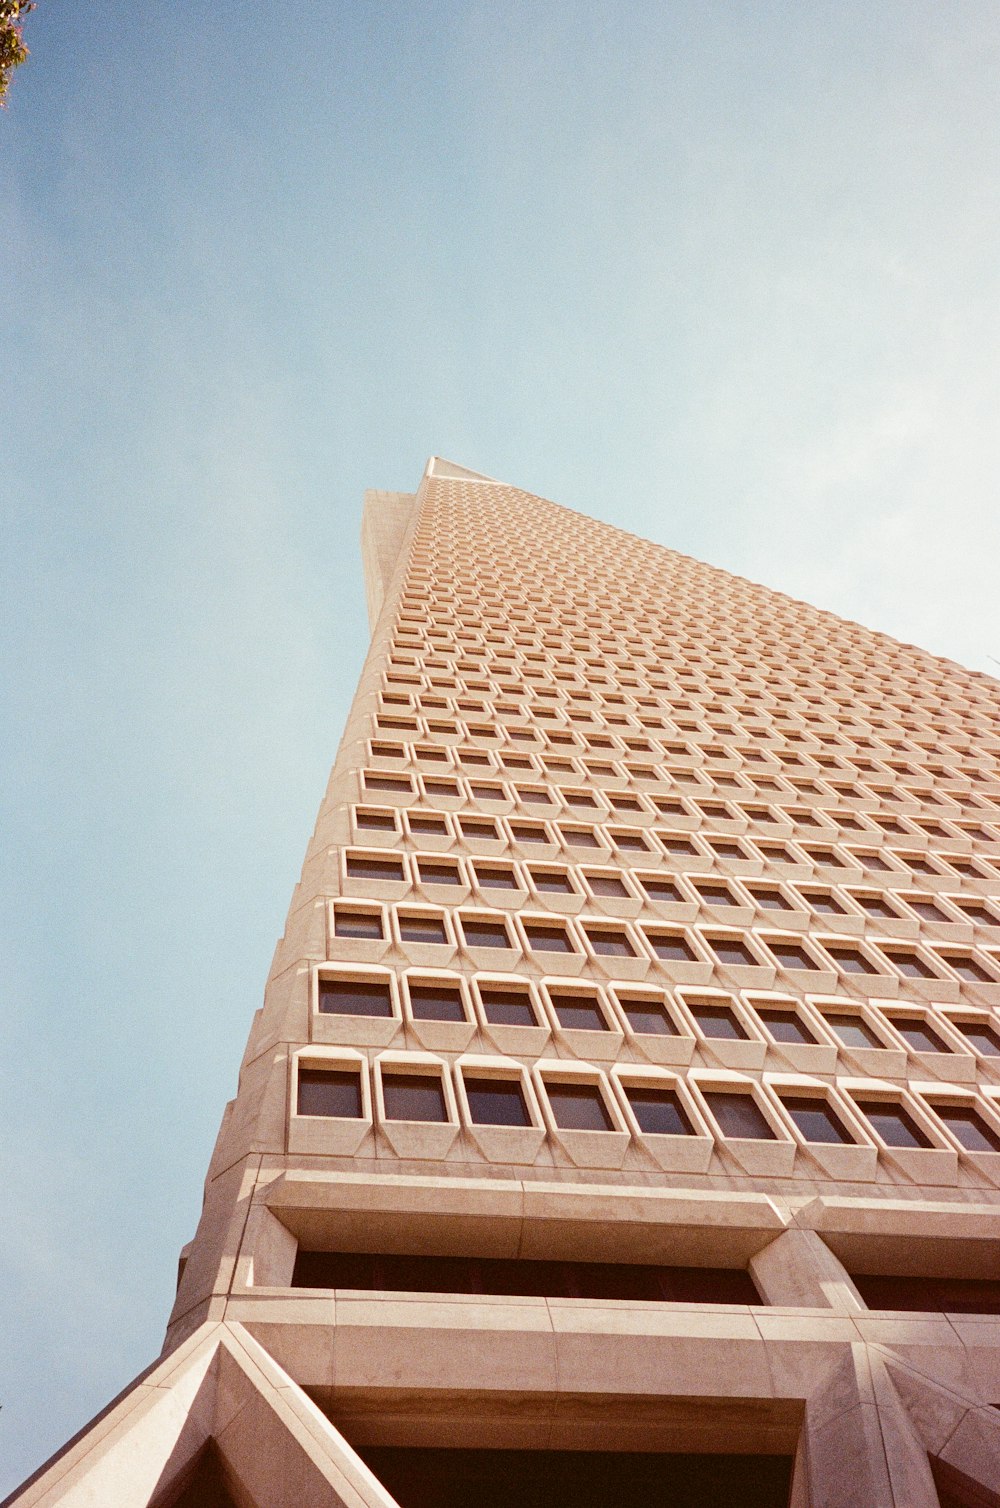 a tall building with a pointed roof